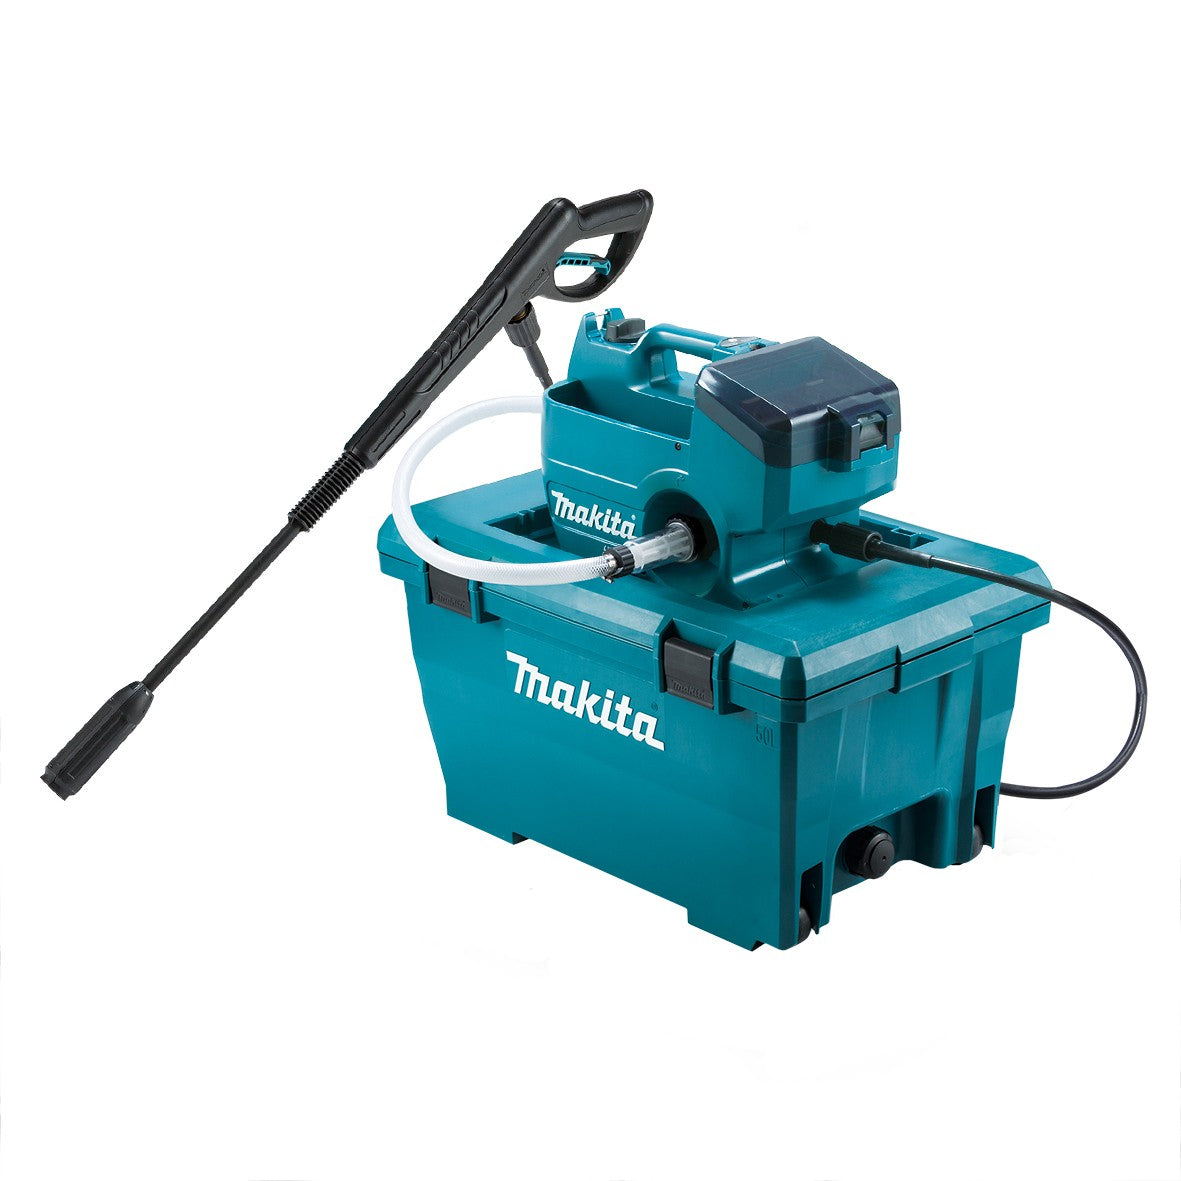 36V (18V x 2) Brushless Pressure Washer Bare (Tool Only) DHW080ZK by Makita